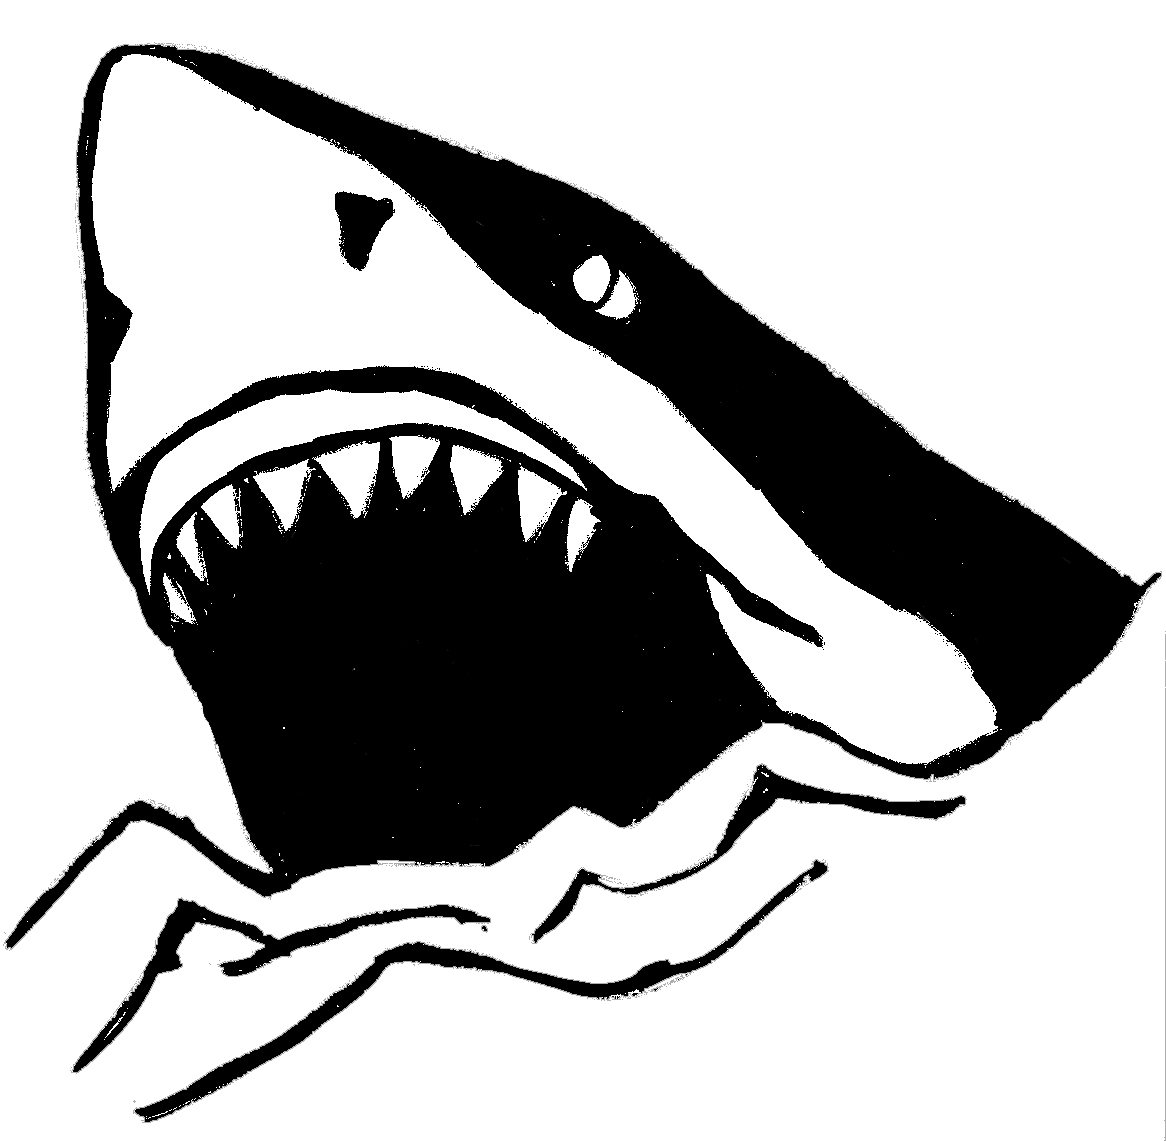 Clipart Shark Black And White Shark Pictures Black And White 23811 Hd